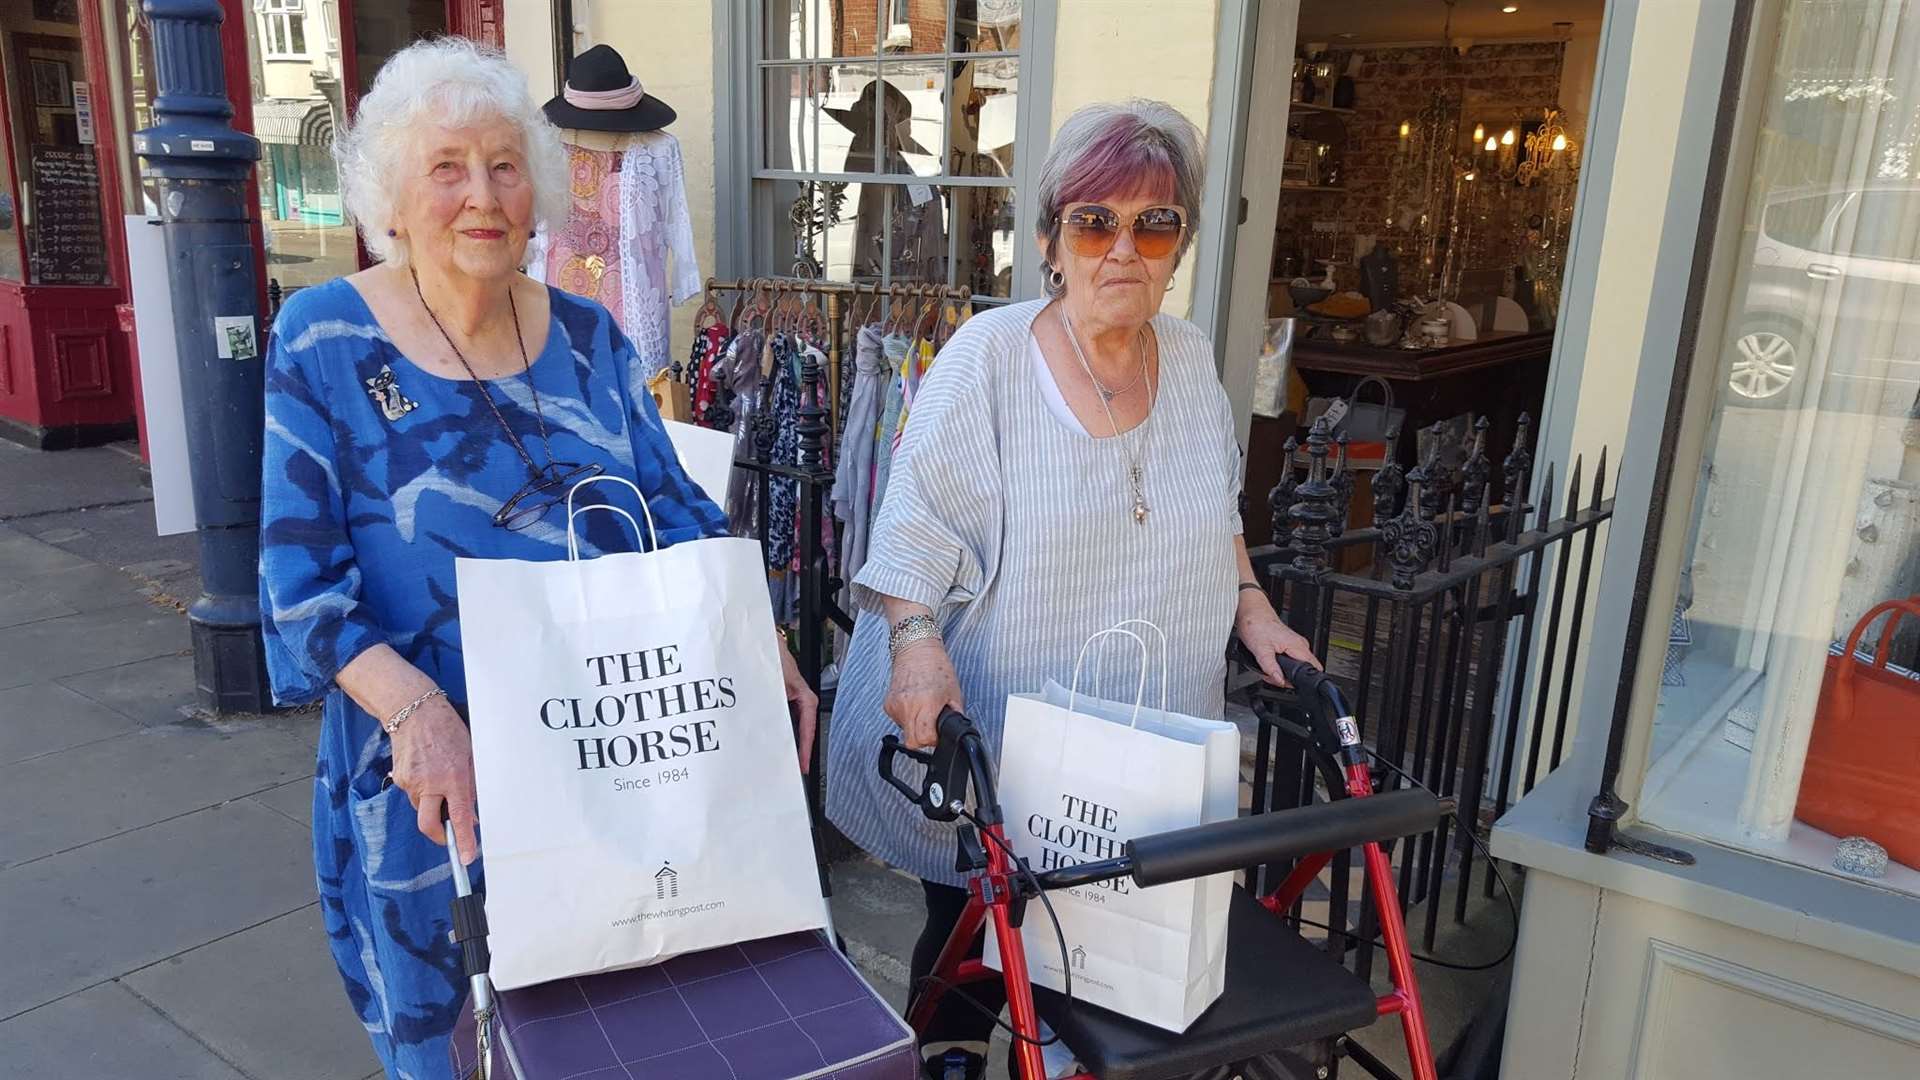 June, 88, and Pauline, 72 went clothes shopping in Whitstable